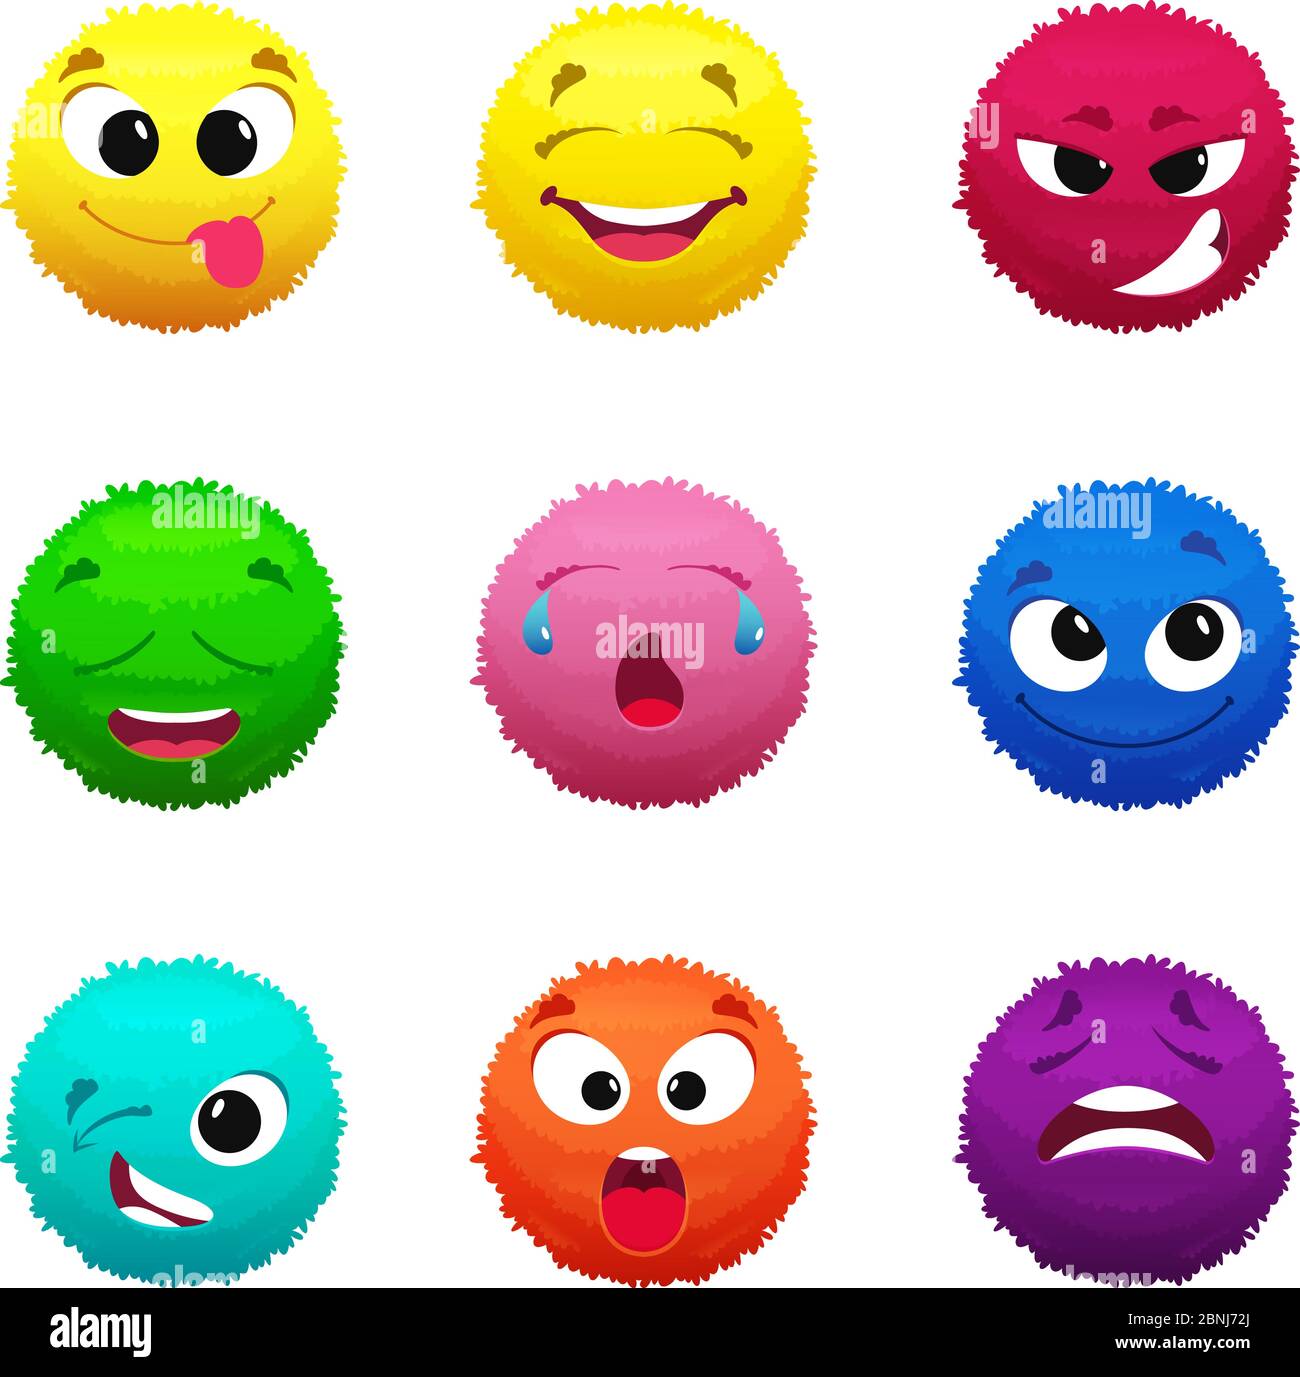 Funny furry faces of monsters. Puffy balls of different colors Stock Vector